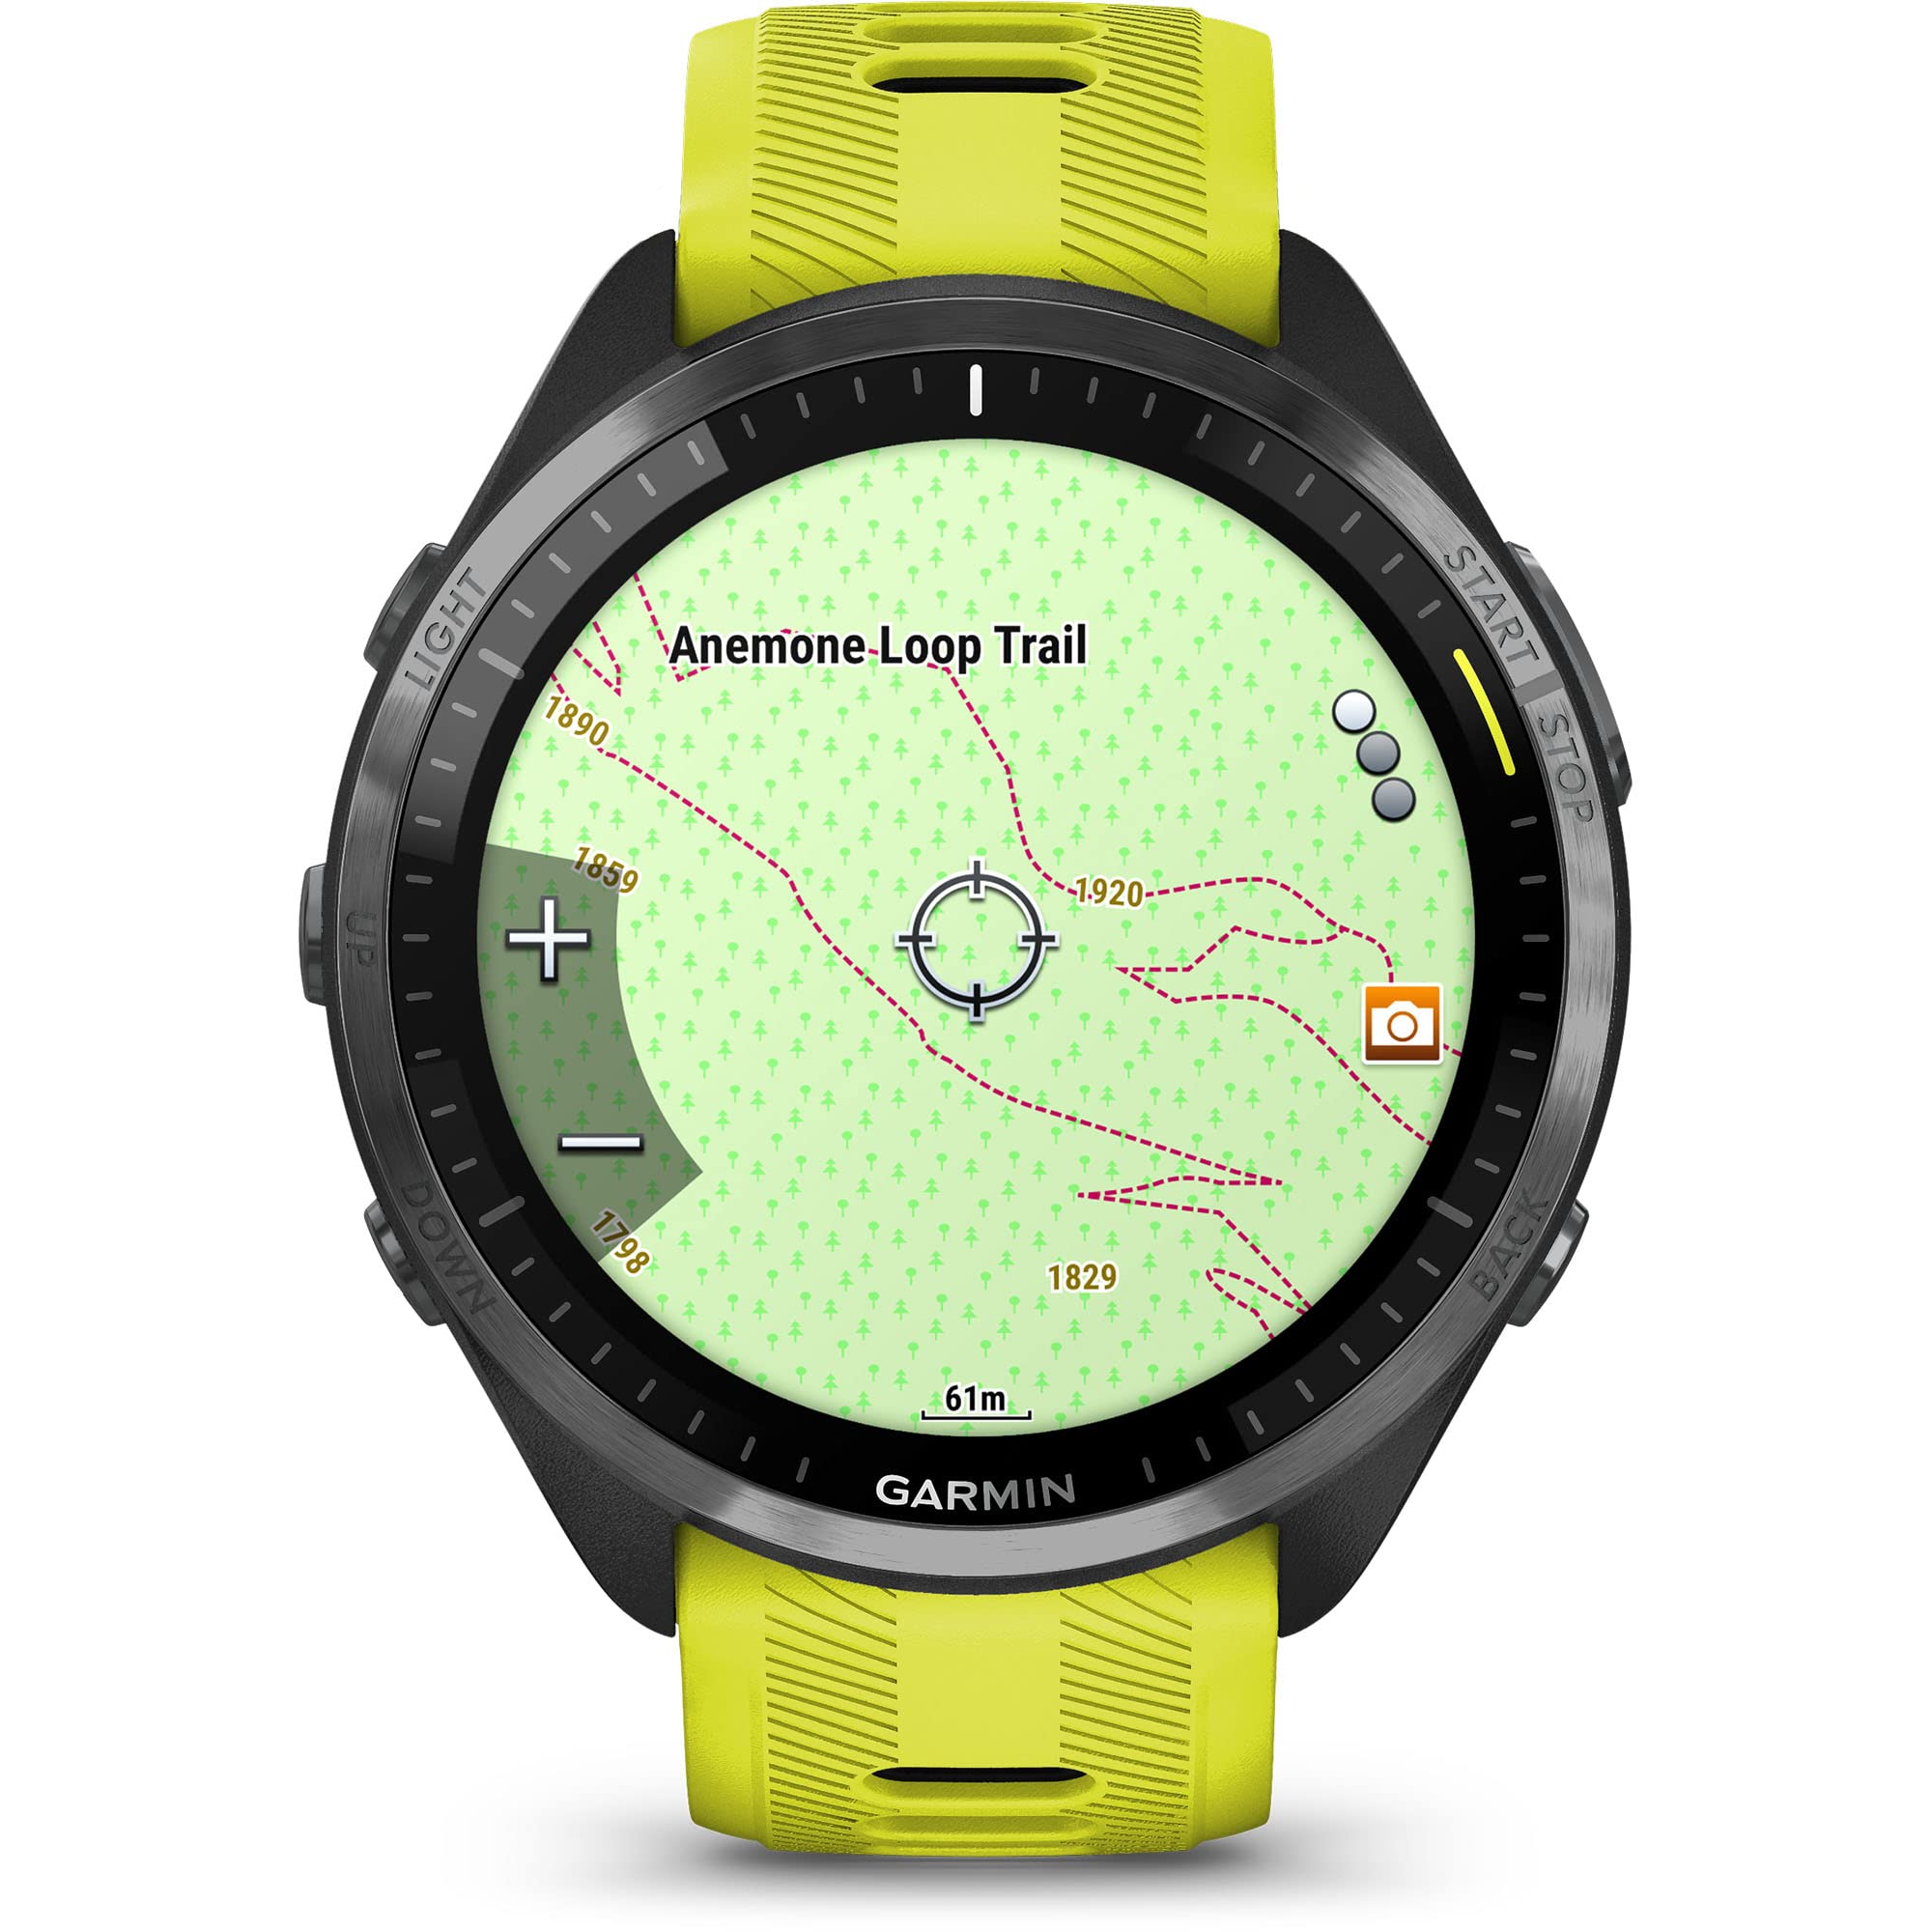 Garmin Forerunner® 965 Running Smartwatch, Colorful AMOLED Display, Training Metrics and Recovery Insights, Amp Yellow and Black - image 3 of 5